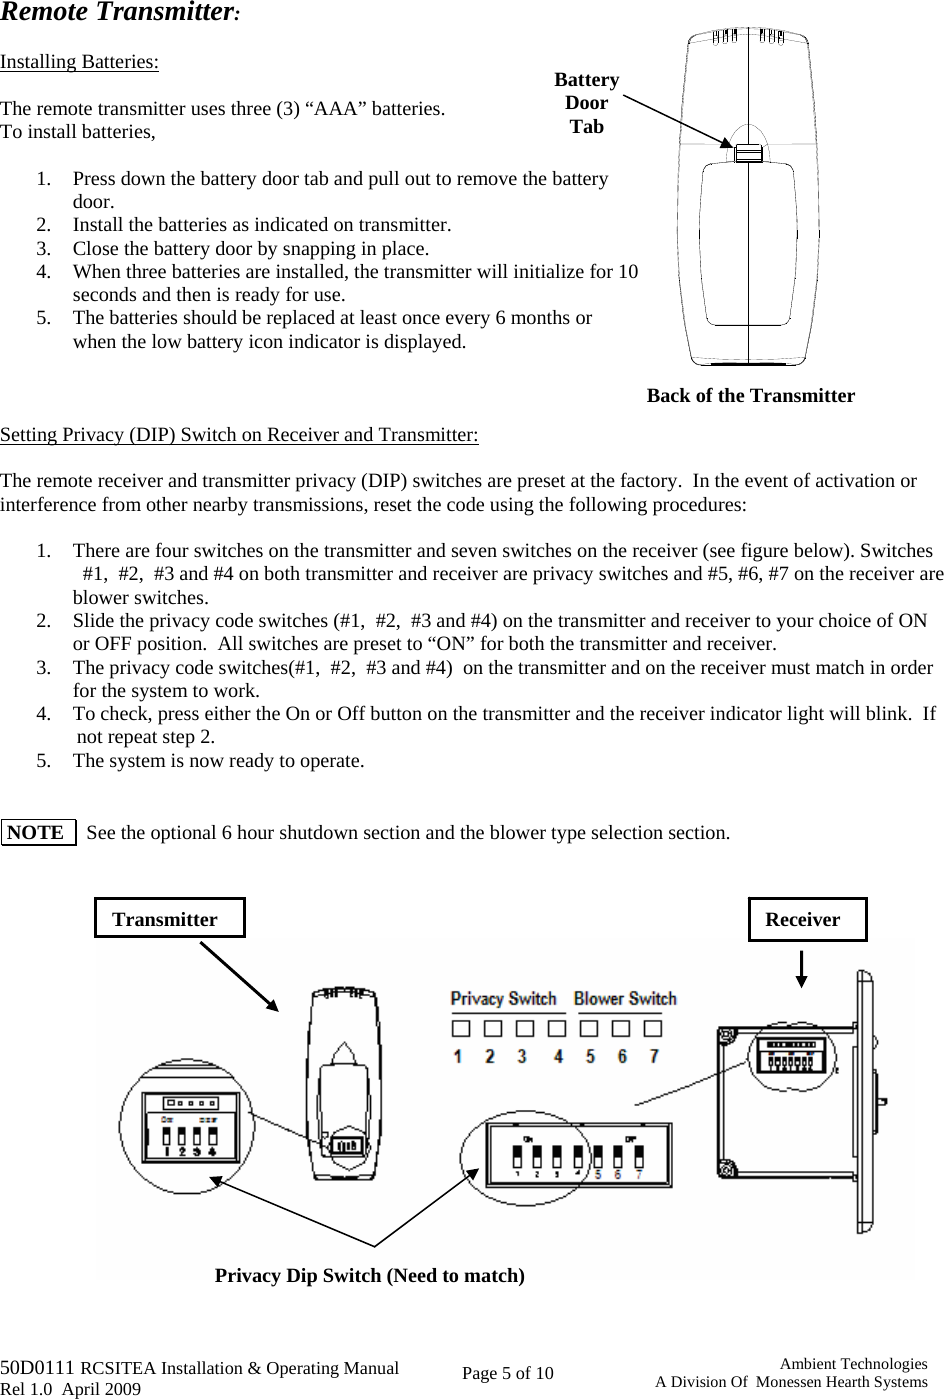   50D0111 RCSITEA Installation &amp; Operating Manual         Rel 1.0  April 2009     Page 5 of 10                                       Ambient TechnologiesA Division Of  Monessen Hearth Systems Back of the Transmitter Battery  Door Tab  Remote Transmitter:  Installing Batteries:  The remote transmitter uses three (3) “AAA” batteries.   To install batteries,  1. Press down the battery door tab and pull out to remove the battery door. 2. Install the batteries as indicated on transmitter. 3. Close the battery door by snapping in place. 4. When three batteries are installed, the transmitter will initialize for 10 seconds and then is ready for use. 5. The batteries should be replaced at least once every 6 months or when the low battery icon indicator is displayed.    Setting Privacy (DIP) Switch on Receiver and Transmitter:  The remote receiver and transmitter privacy (DIP) switches are preset at the factory.  In the event of activation or interference from other nearby transmissions, reset the code using the following procedures:  1. There are four switches on the transmitter and seven switches on the receiver (see figure below). Switches     #1,  #2,  #3 and #4 on both transmitter and receiver are privacy switches and #5, #6, #7 on the receiver are blower switches. 2. Slide the privacy code switches (#1,  #2,  #3 and #4) on the transmitter and receiver to your choice of ON or OFF position.  All switches are preset to “ON” for both the transmitter and receiver. 3. The privacy code switches(#1,  #2,  #3 and #4)  on the transmitter and on the receiver must match in order for the system to work. 4. To check, press either the On or Off button on the transmitter and the receiver indicator light will blink.  If          not repeat step 2. 5. The system is now ready to operate.    NOTE    See the optional 6 hour shutdown section and the blower type selection section.                                 Receiver Privacy Dip Switch (Need to match) Transmitter 